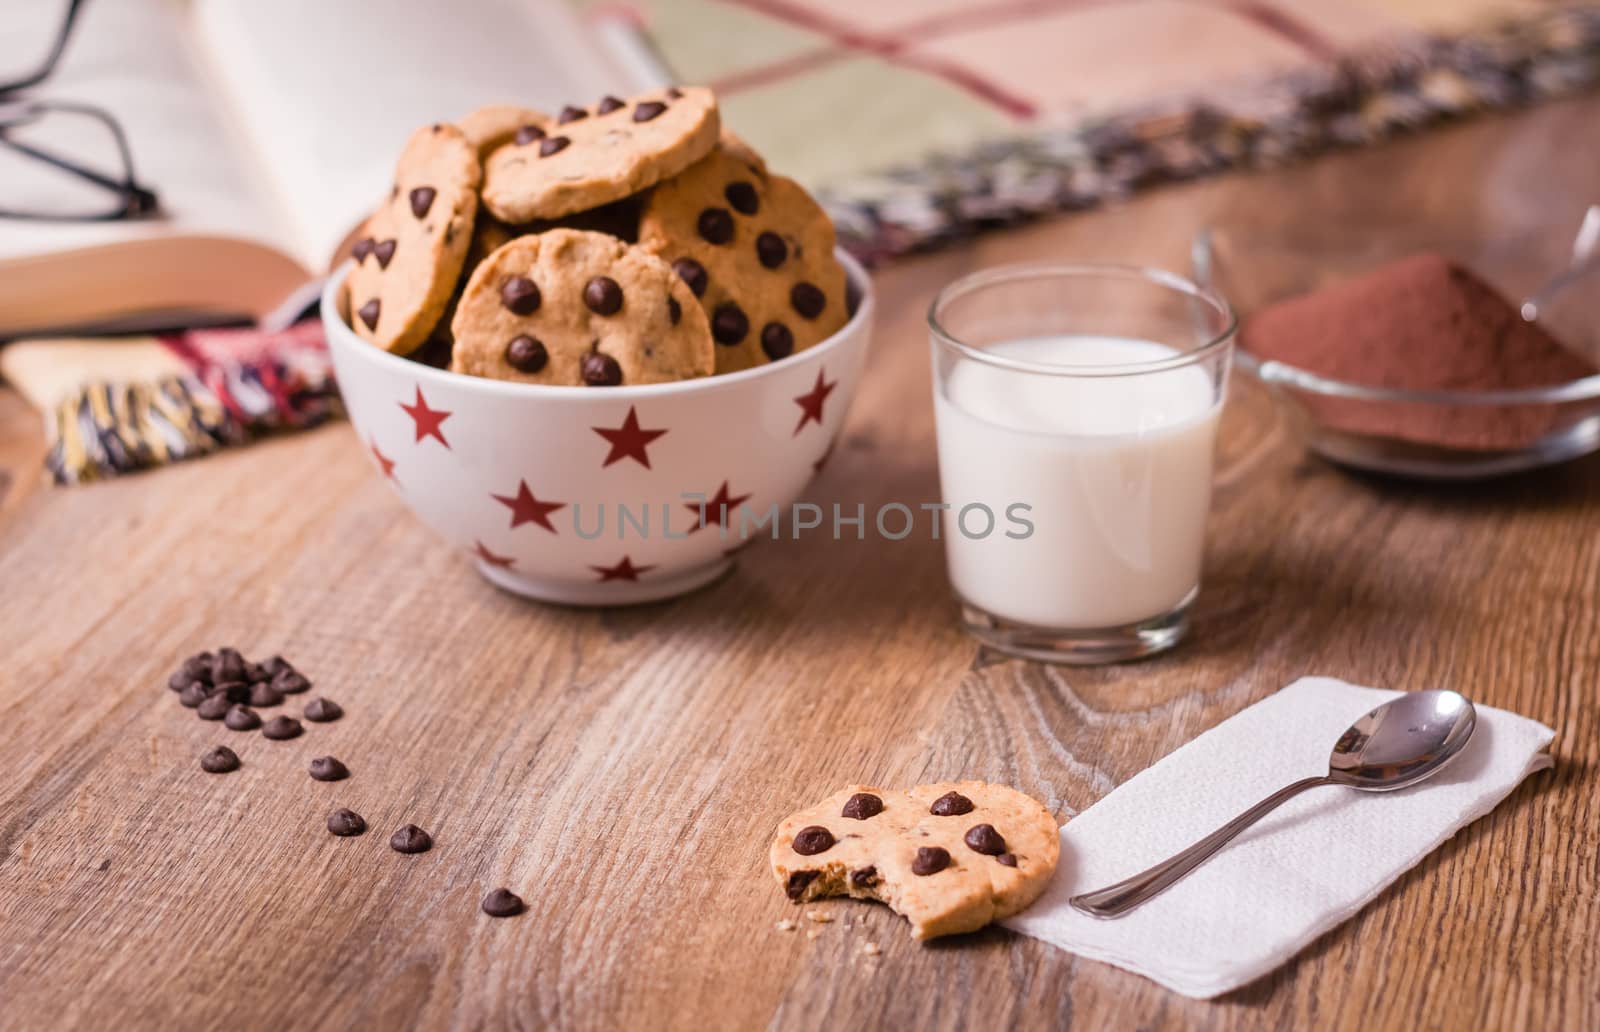 Closeup of chocolate chip cookies on stars bowl and milk glass over a wooden background. Image focused in cookie bite